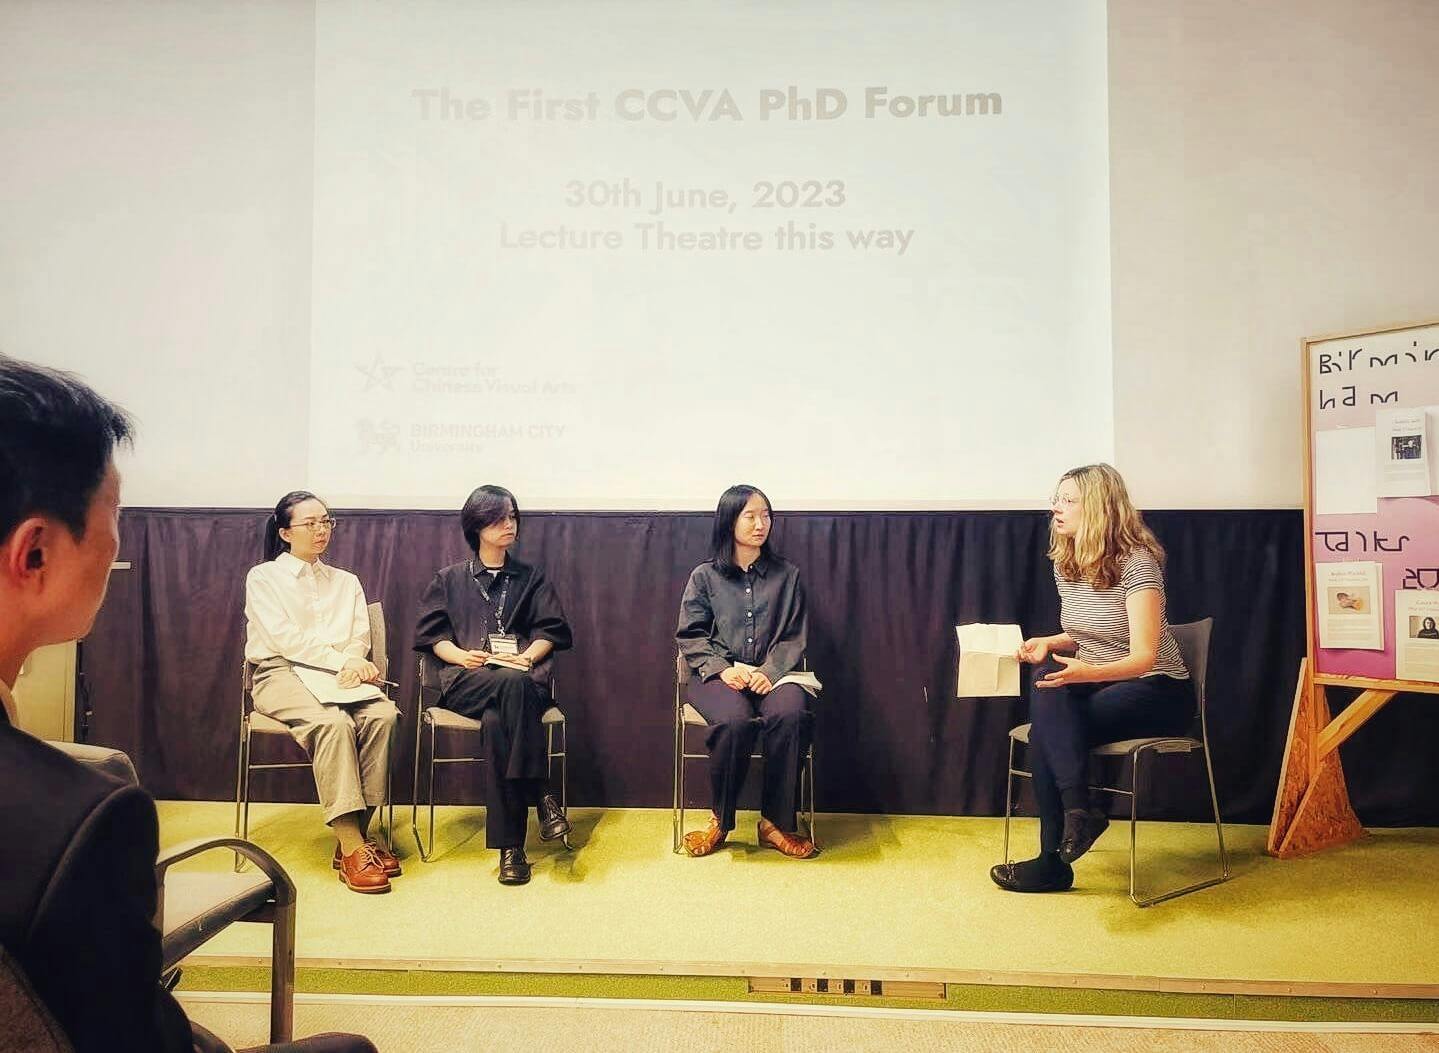 Panel discussion at the first CCVA PhD Forum in June 2023